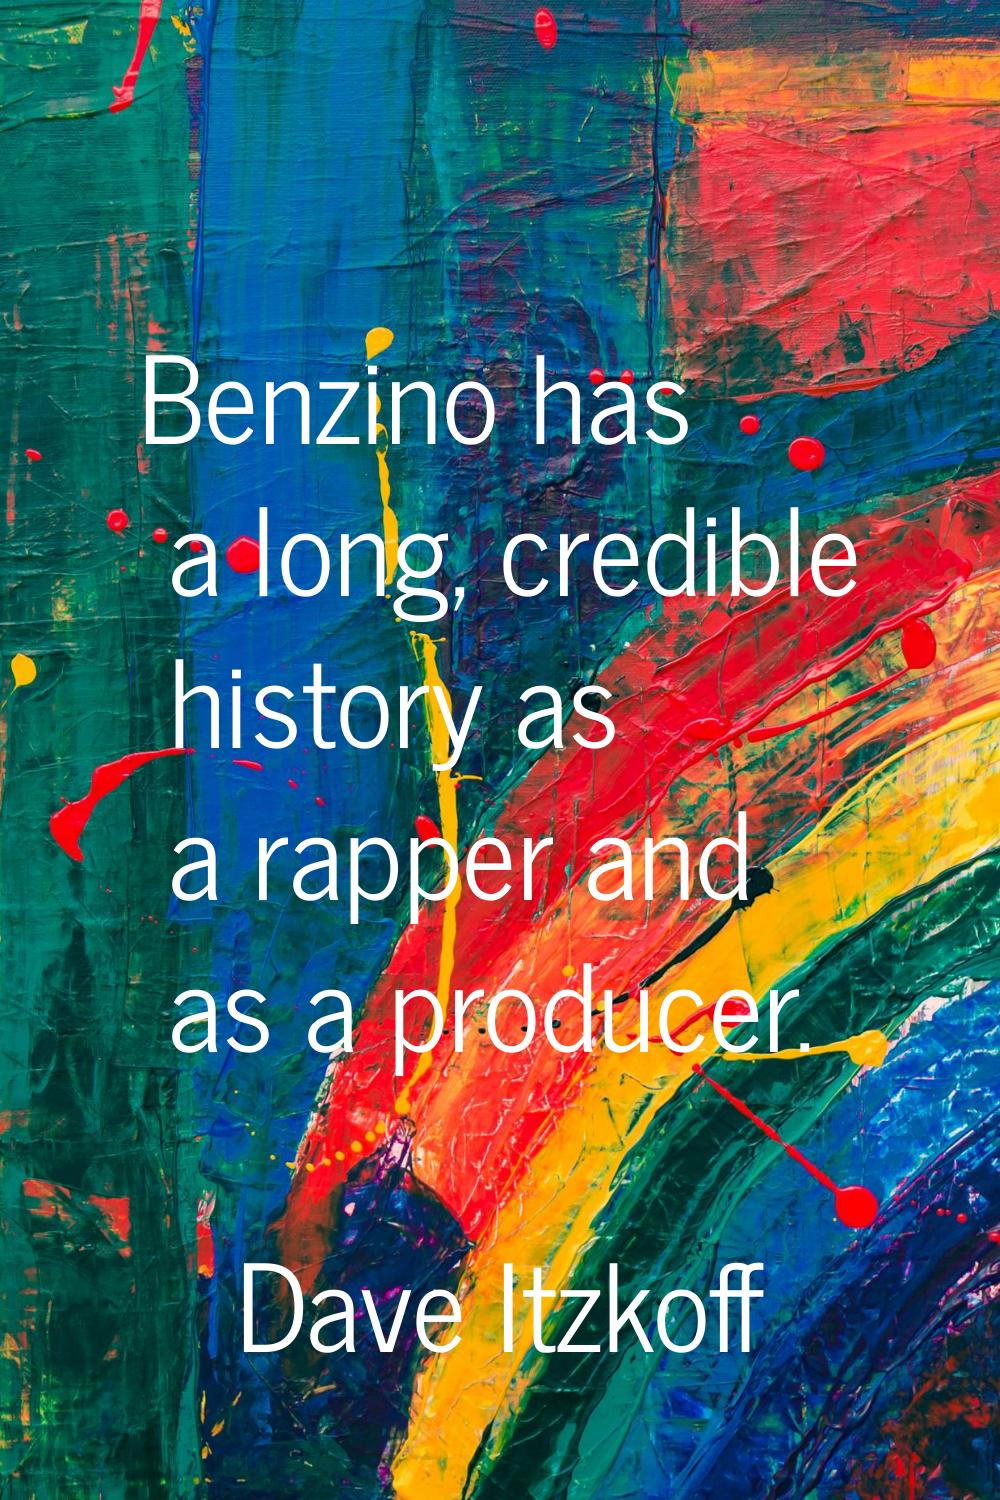 Benzino has a long, credible history as a rapper and as a producer.